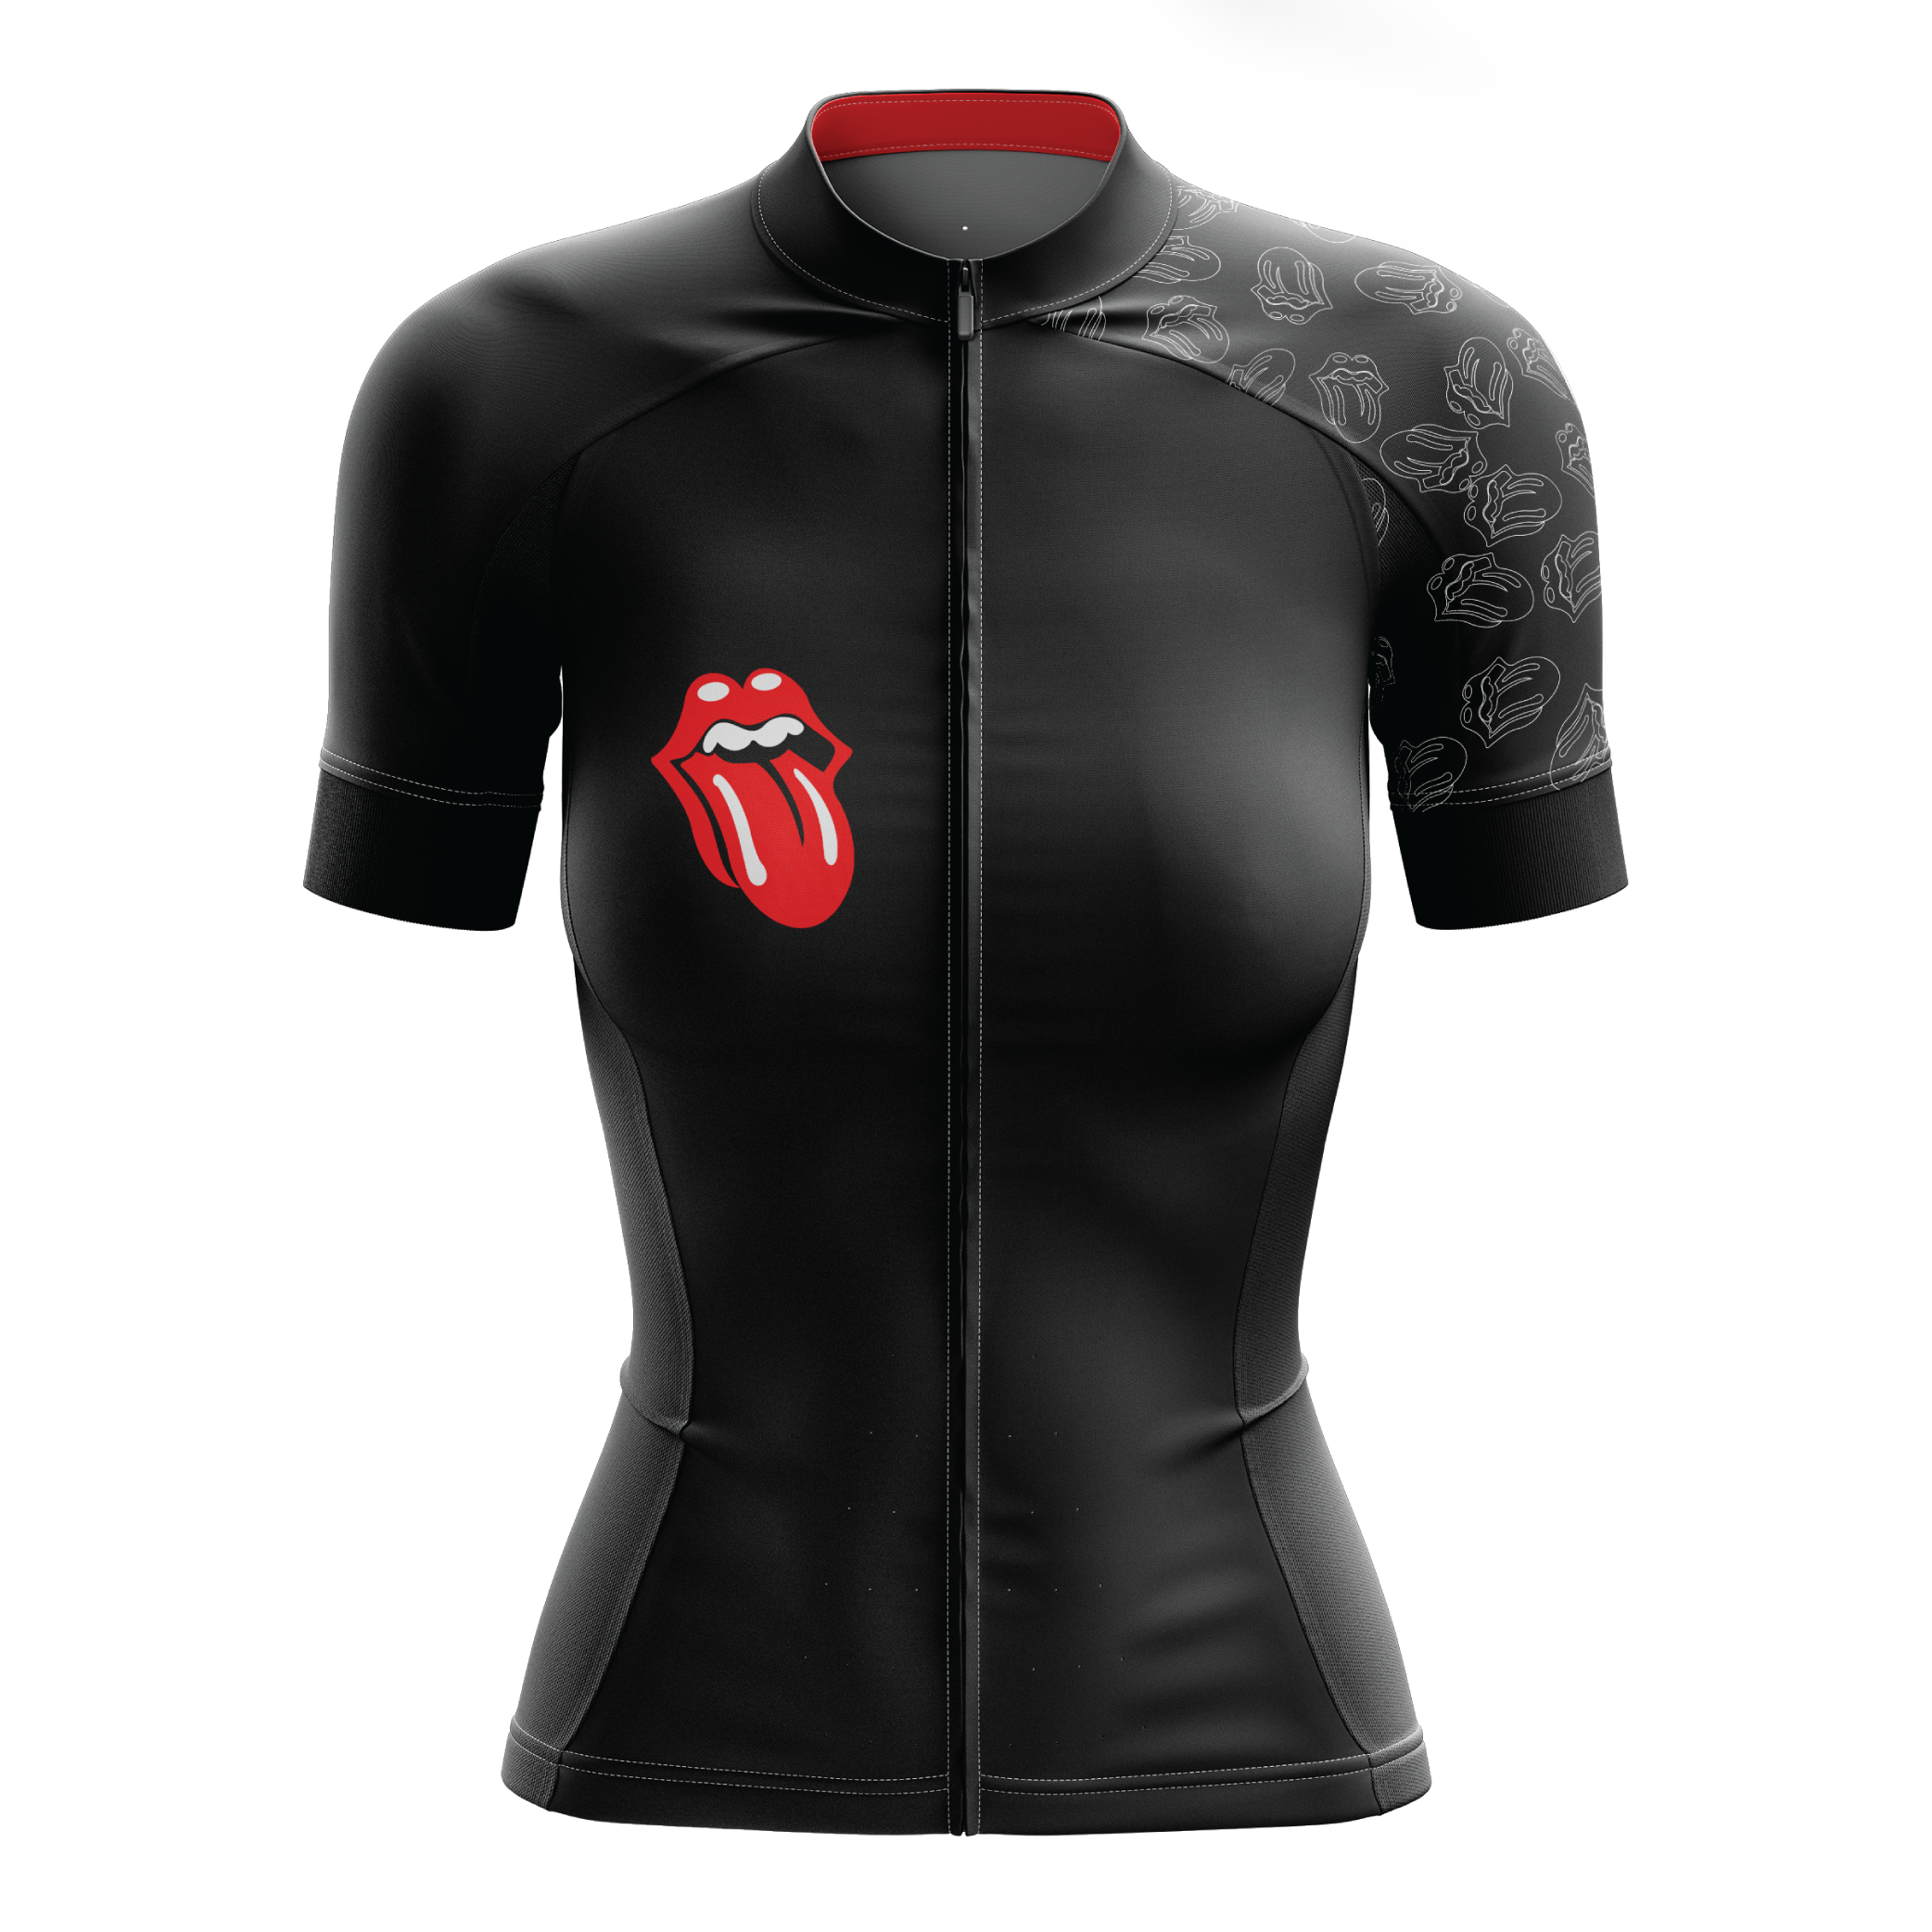 The Stones Bike Team Short Sleeve Cycling Jersey